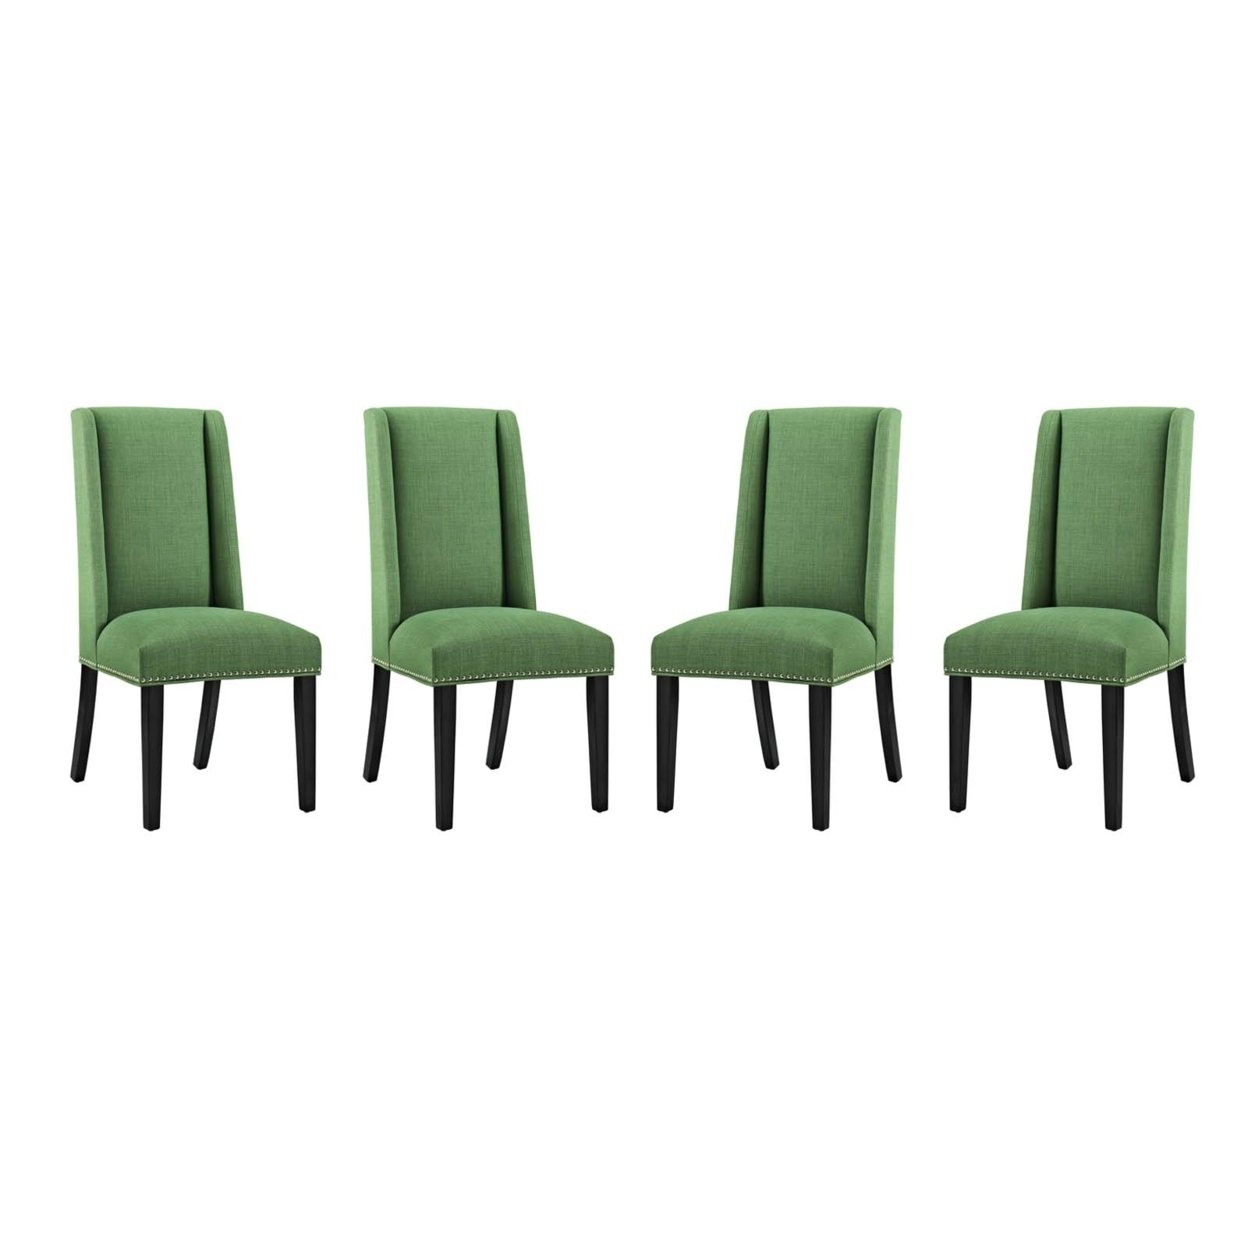 Baron Dining Chair Fabric Set Of 4, Green